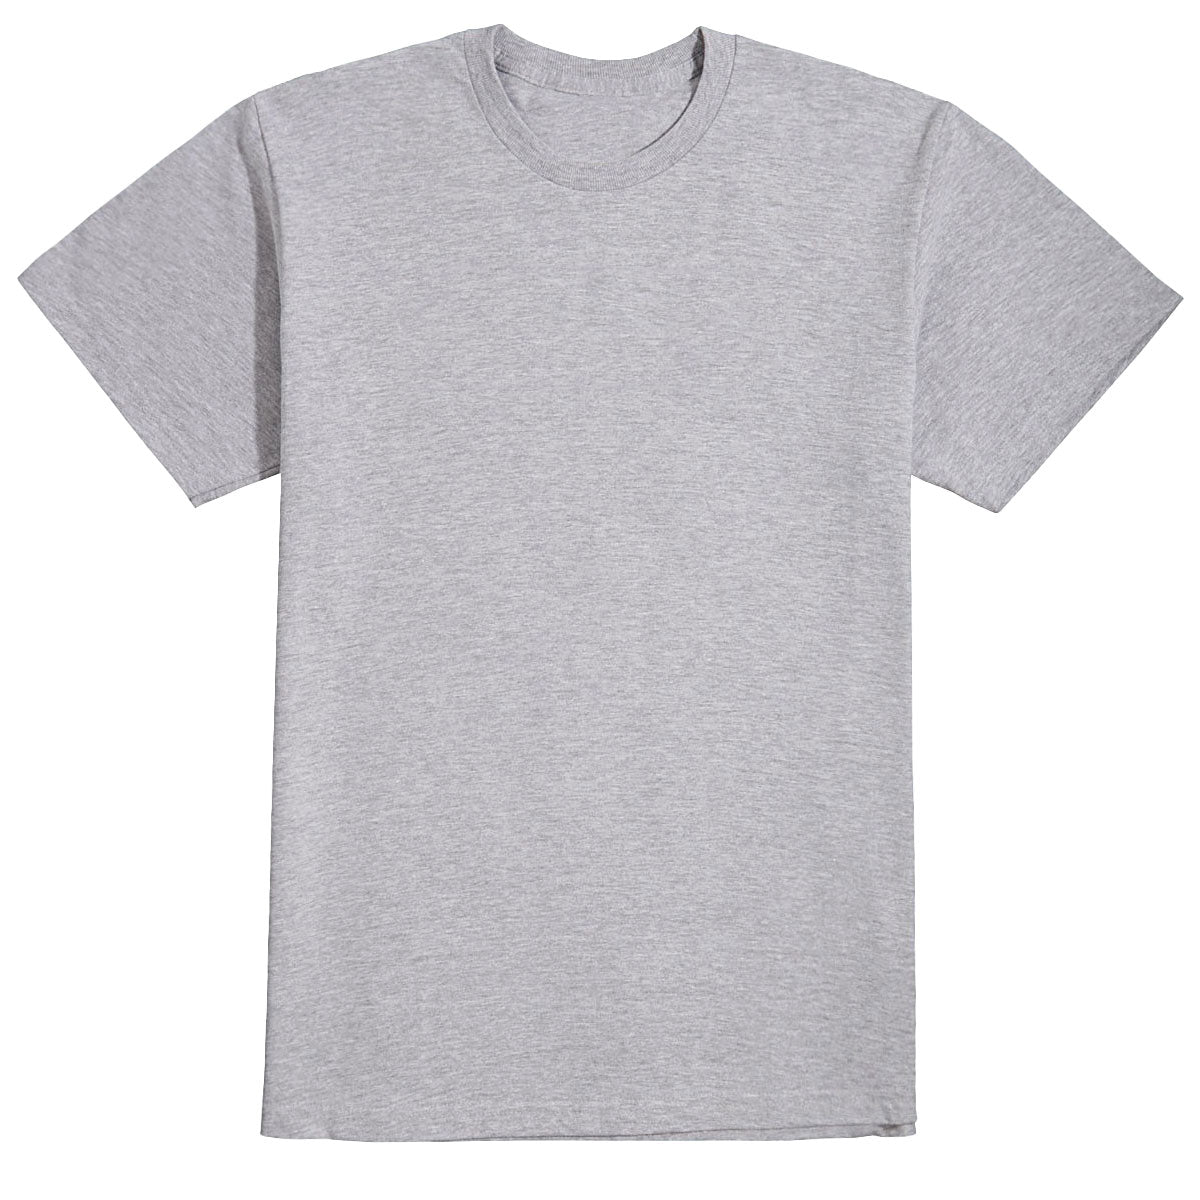 Converse Spider Web T-Shirt - Heather Grey - MD image 1